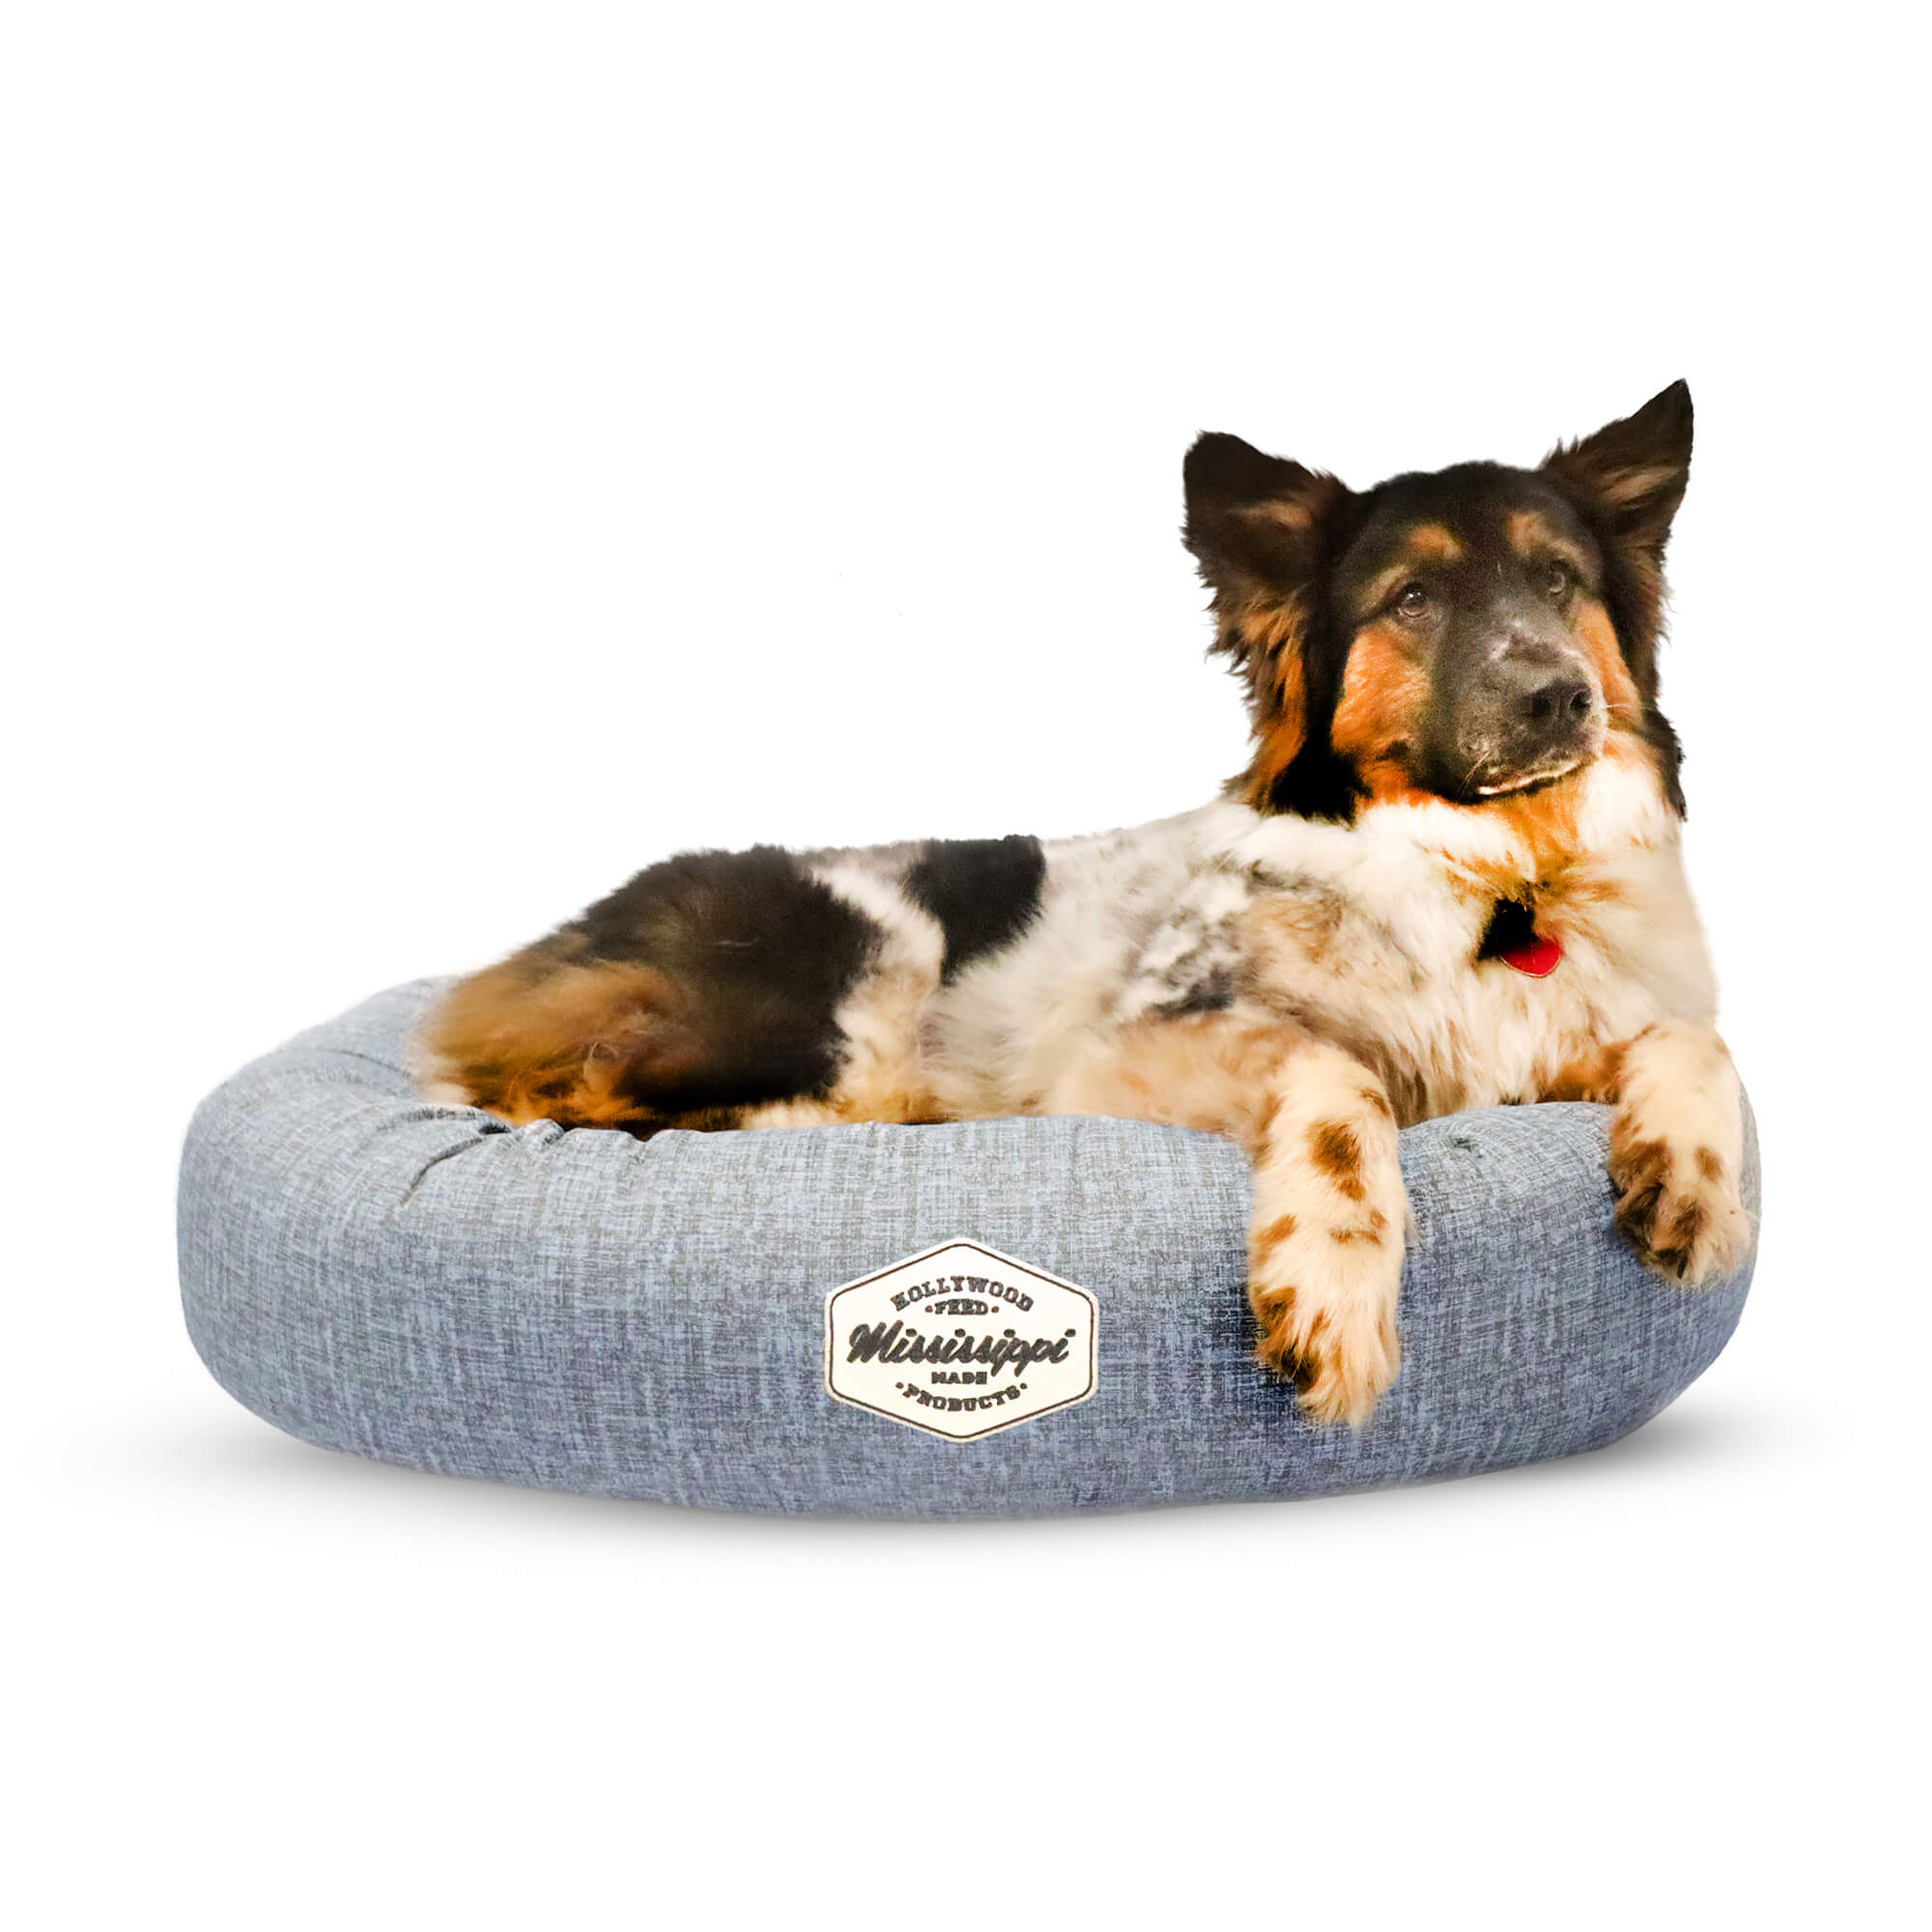 Mississippi Made blue cotton donut bed front view with dog